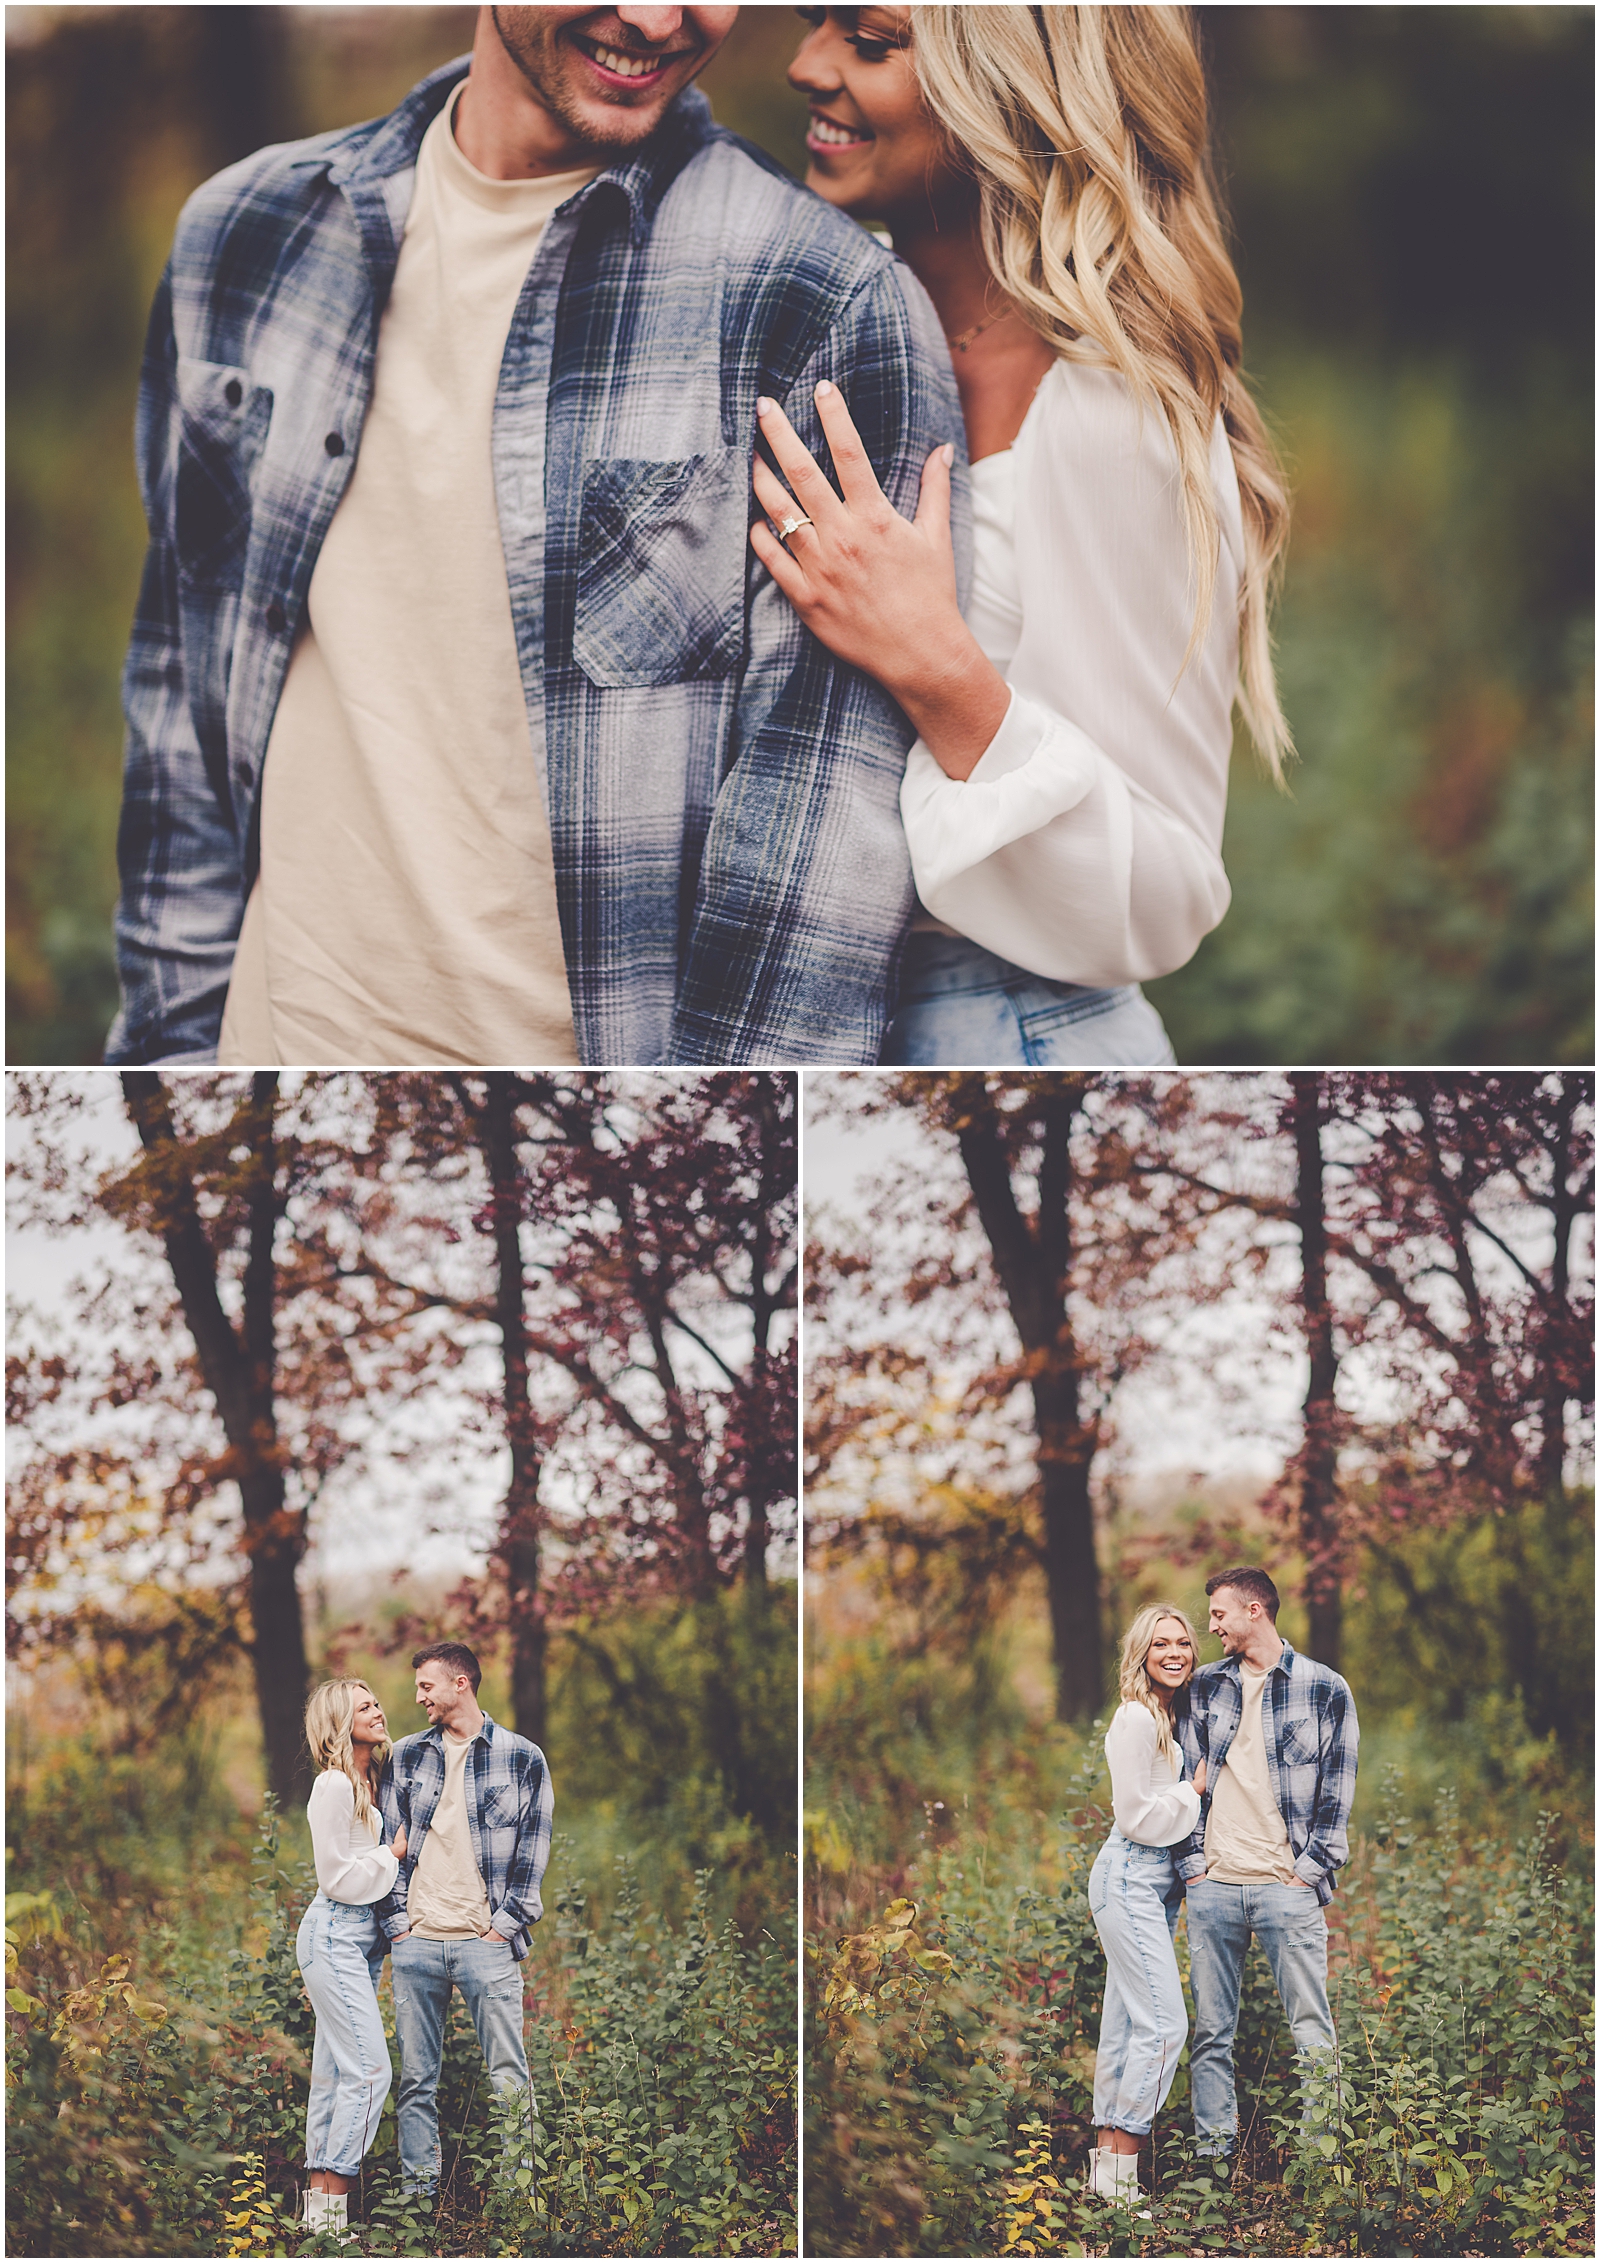 Kali and Trace's fall Cantigny Park engagement photos in Wheaton, IL with Chicagoland wedding photographer Kara Evans Photographer.